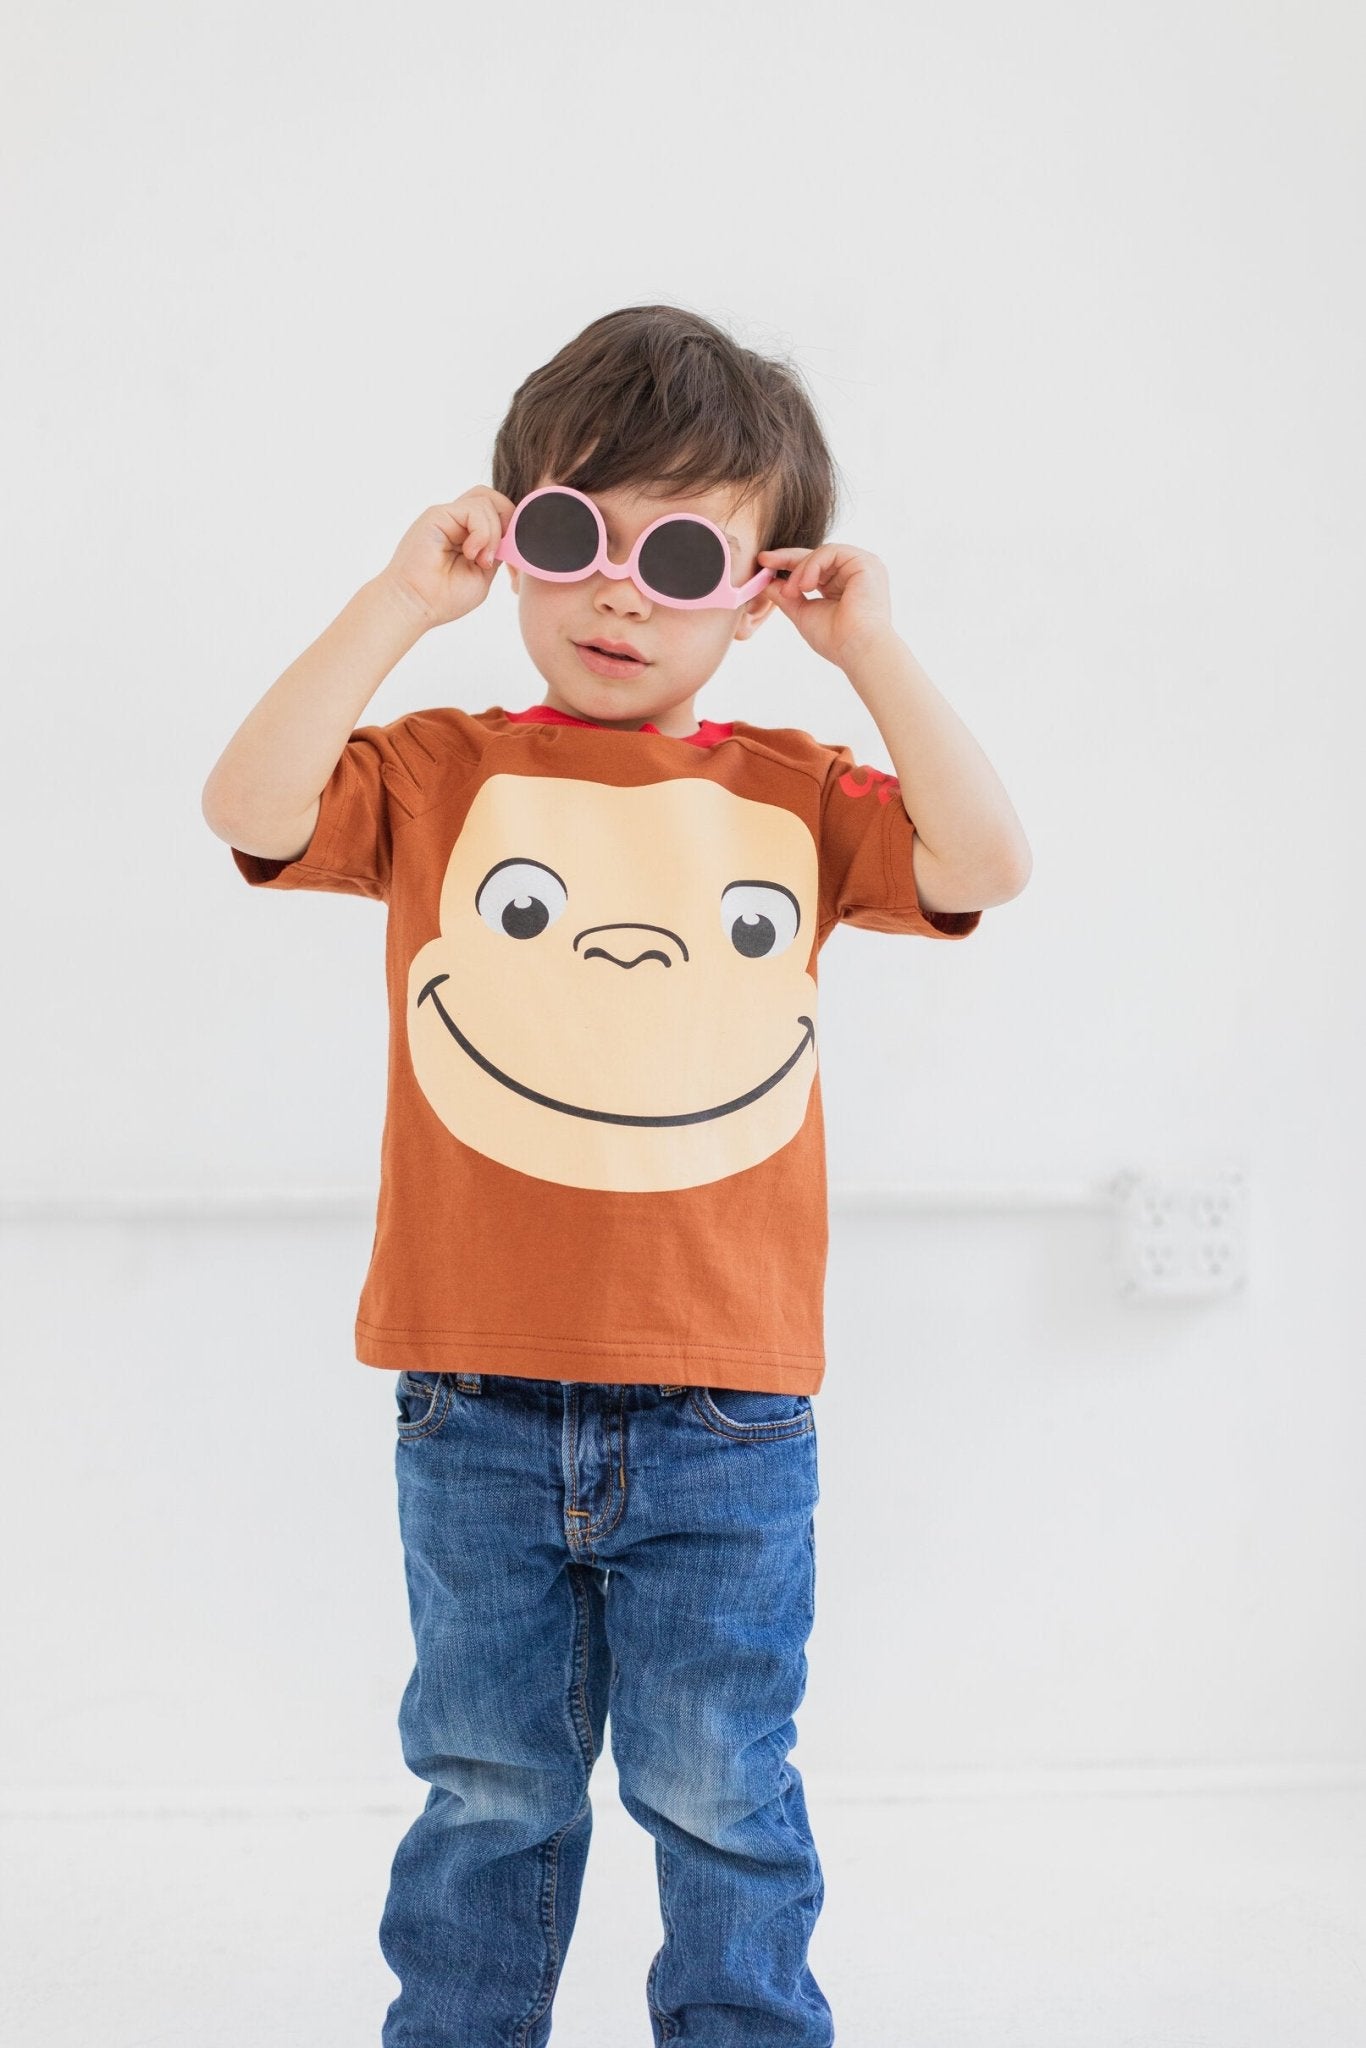 Curious George 2 Pack Graphic T-Shirts - imagikids